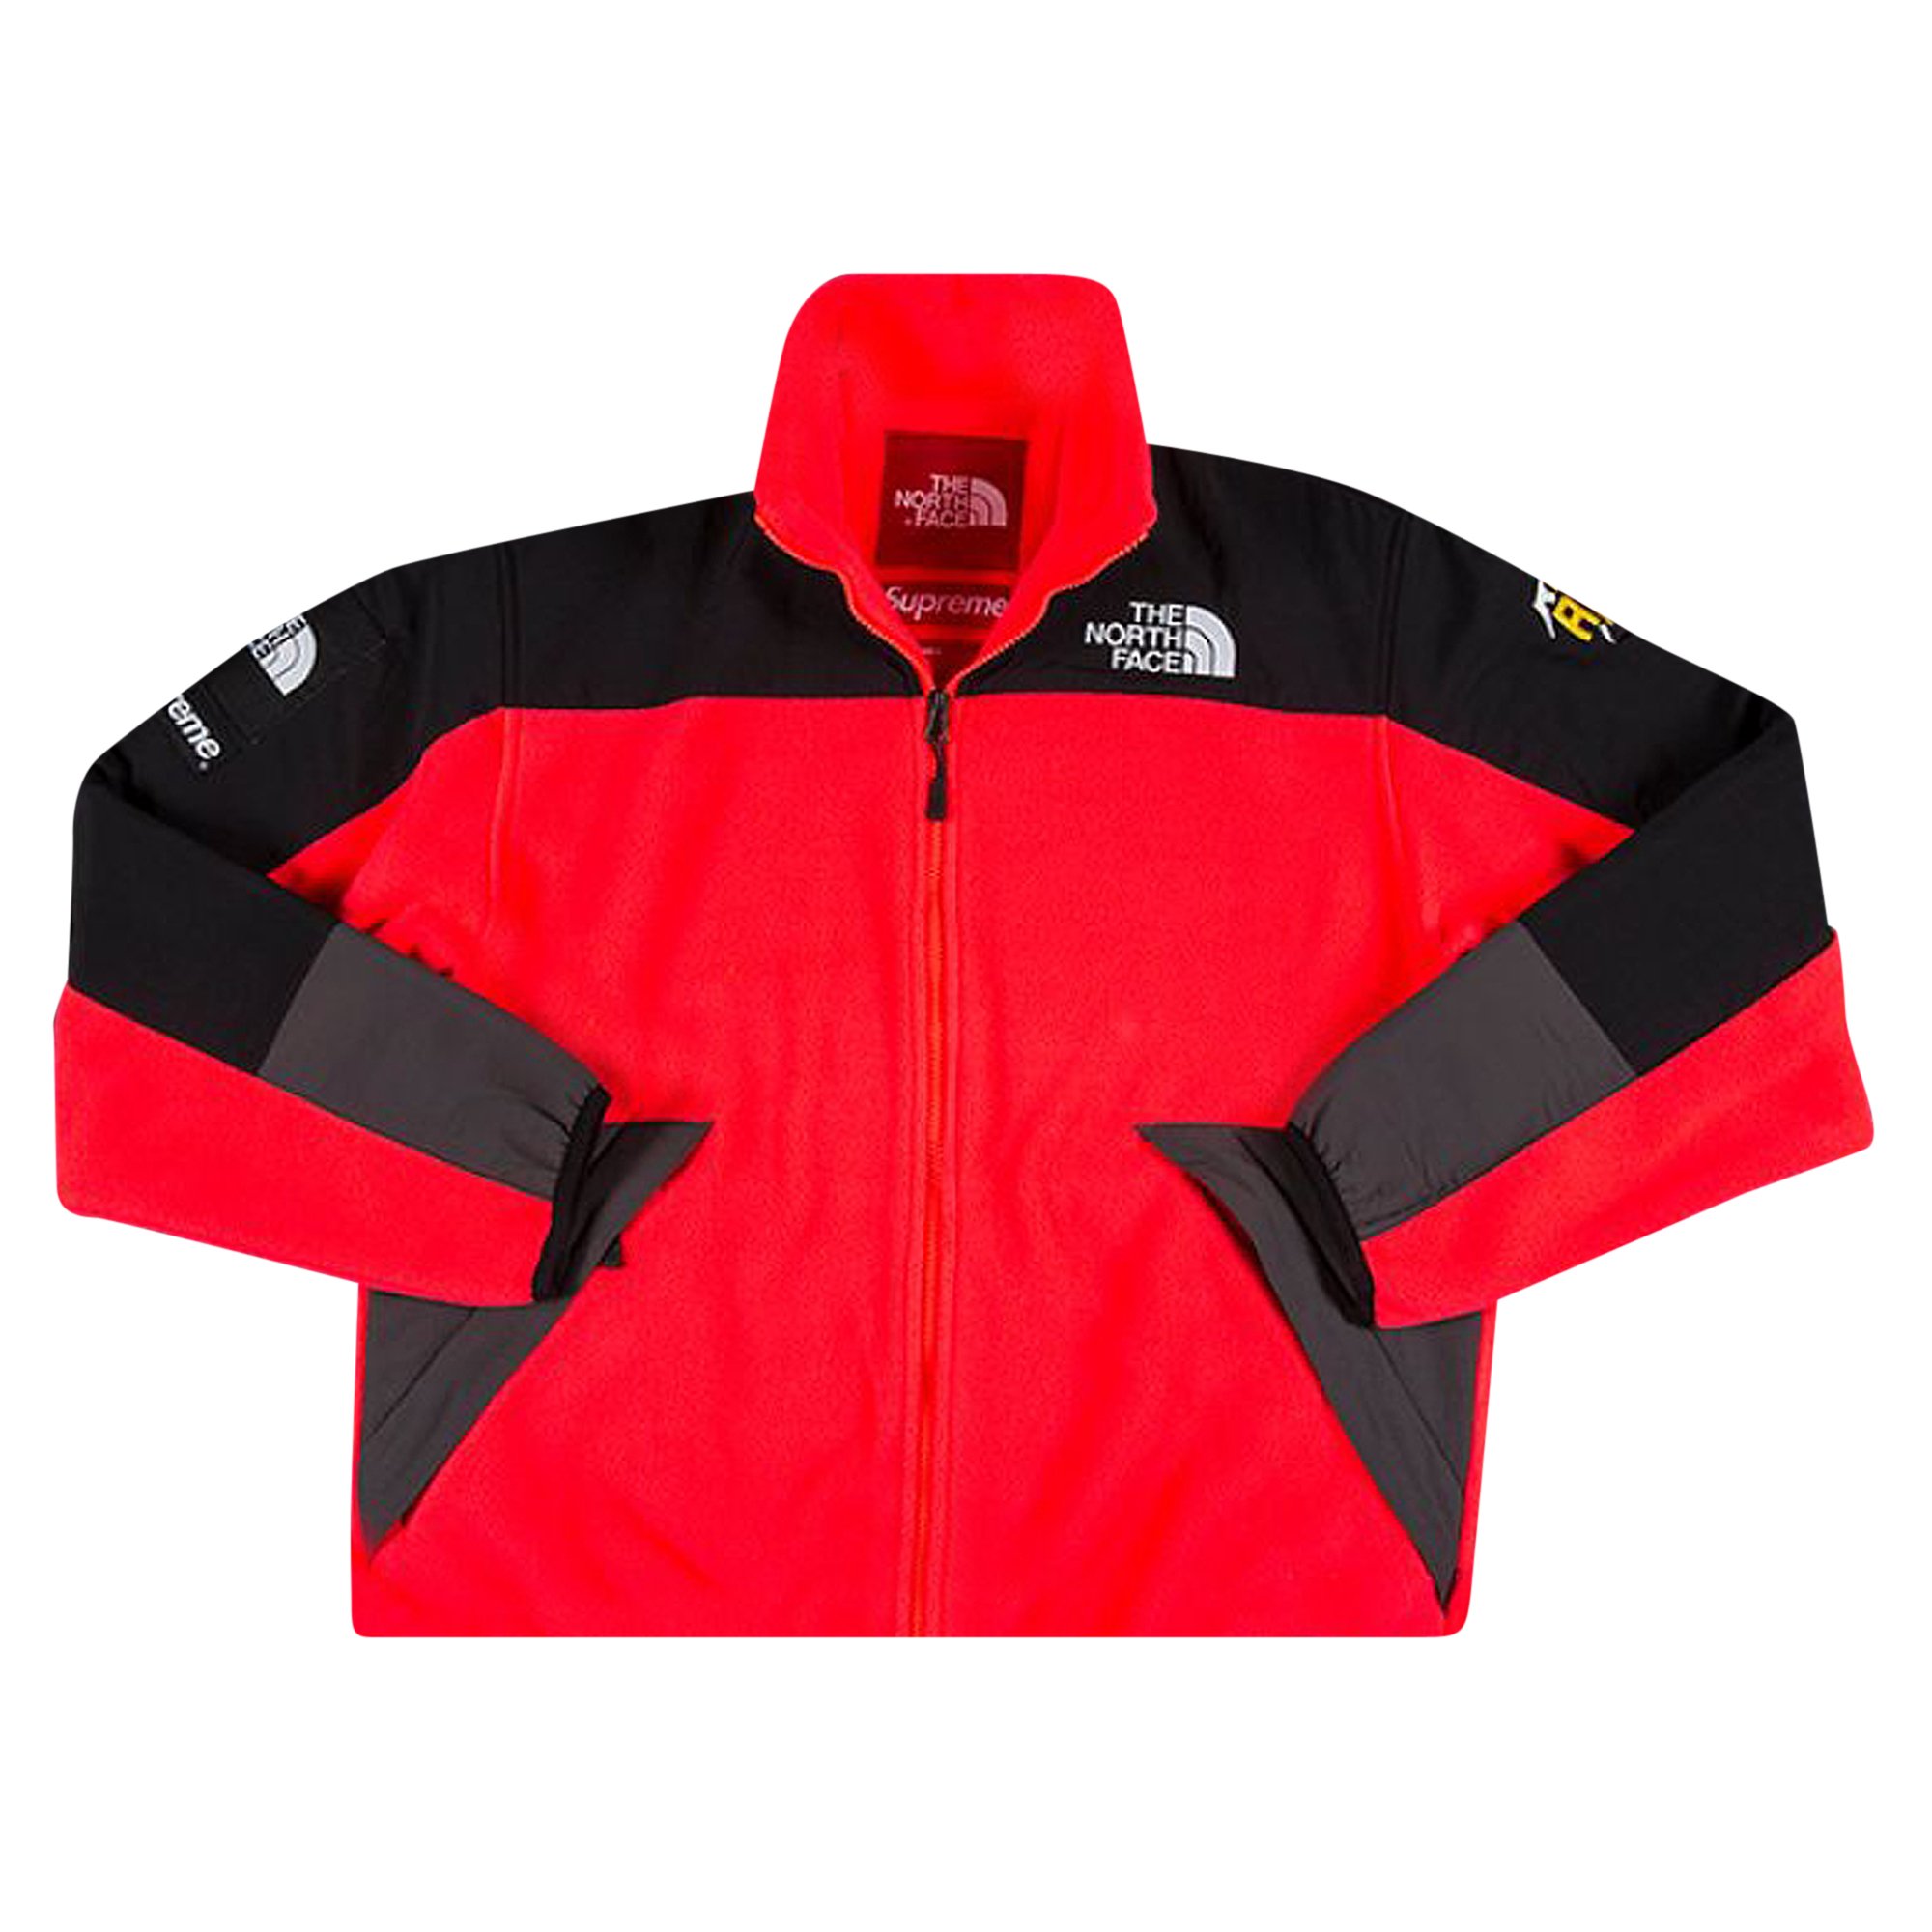 Buy Supreme x The North Face RTG Fleece Jacket 'Bright Red